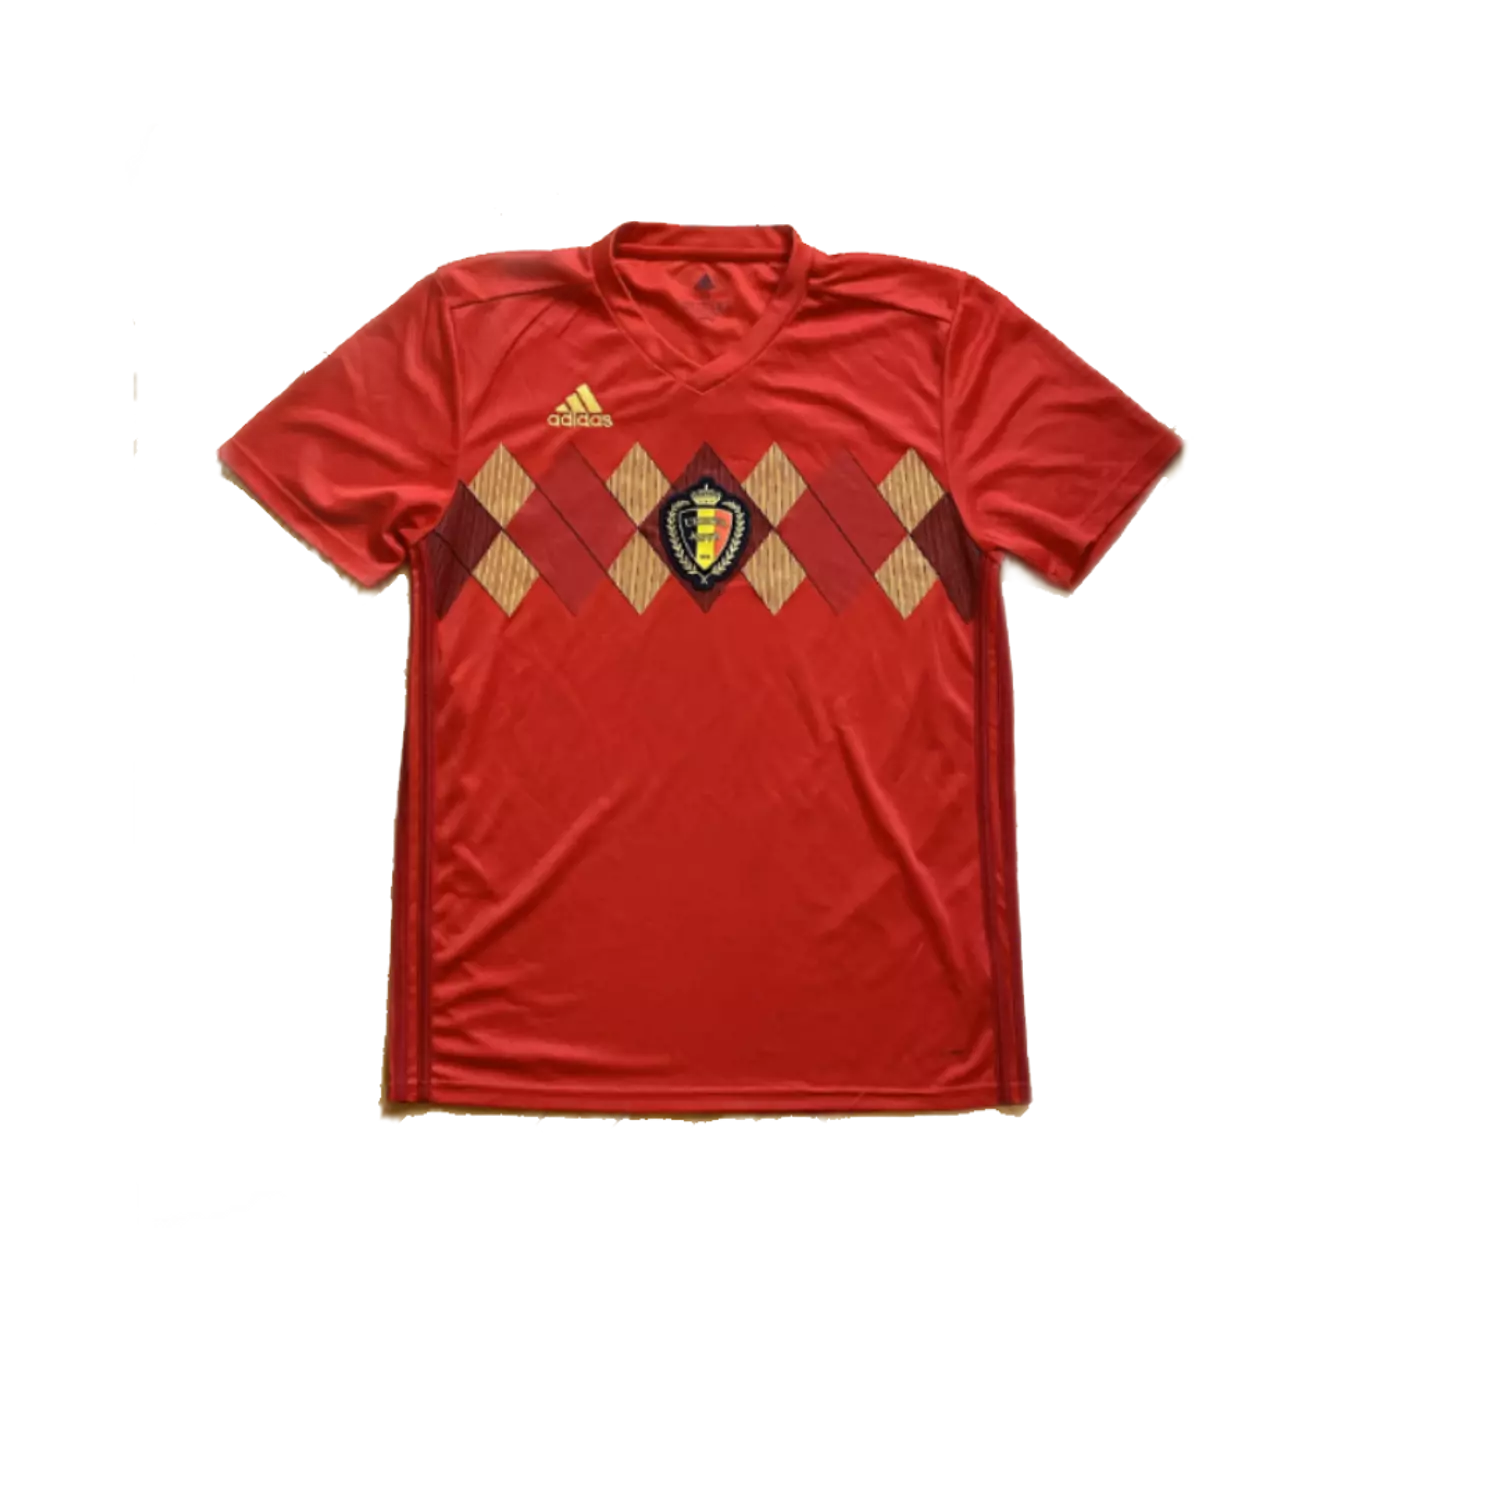 Belgium 2018 Home Kit (M) hover image